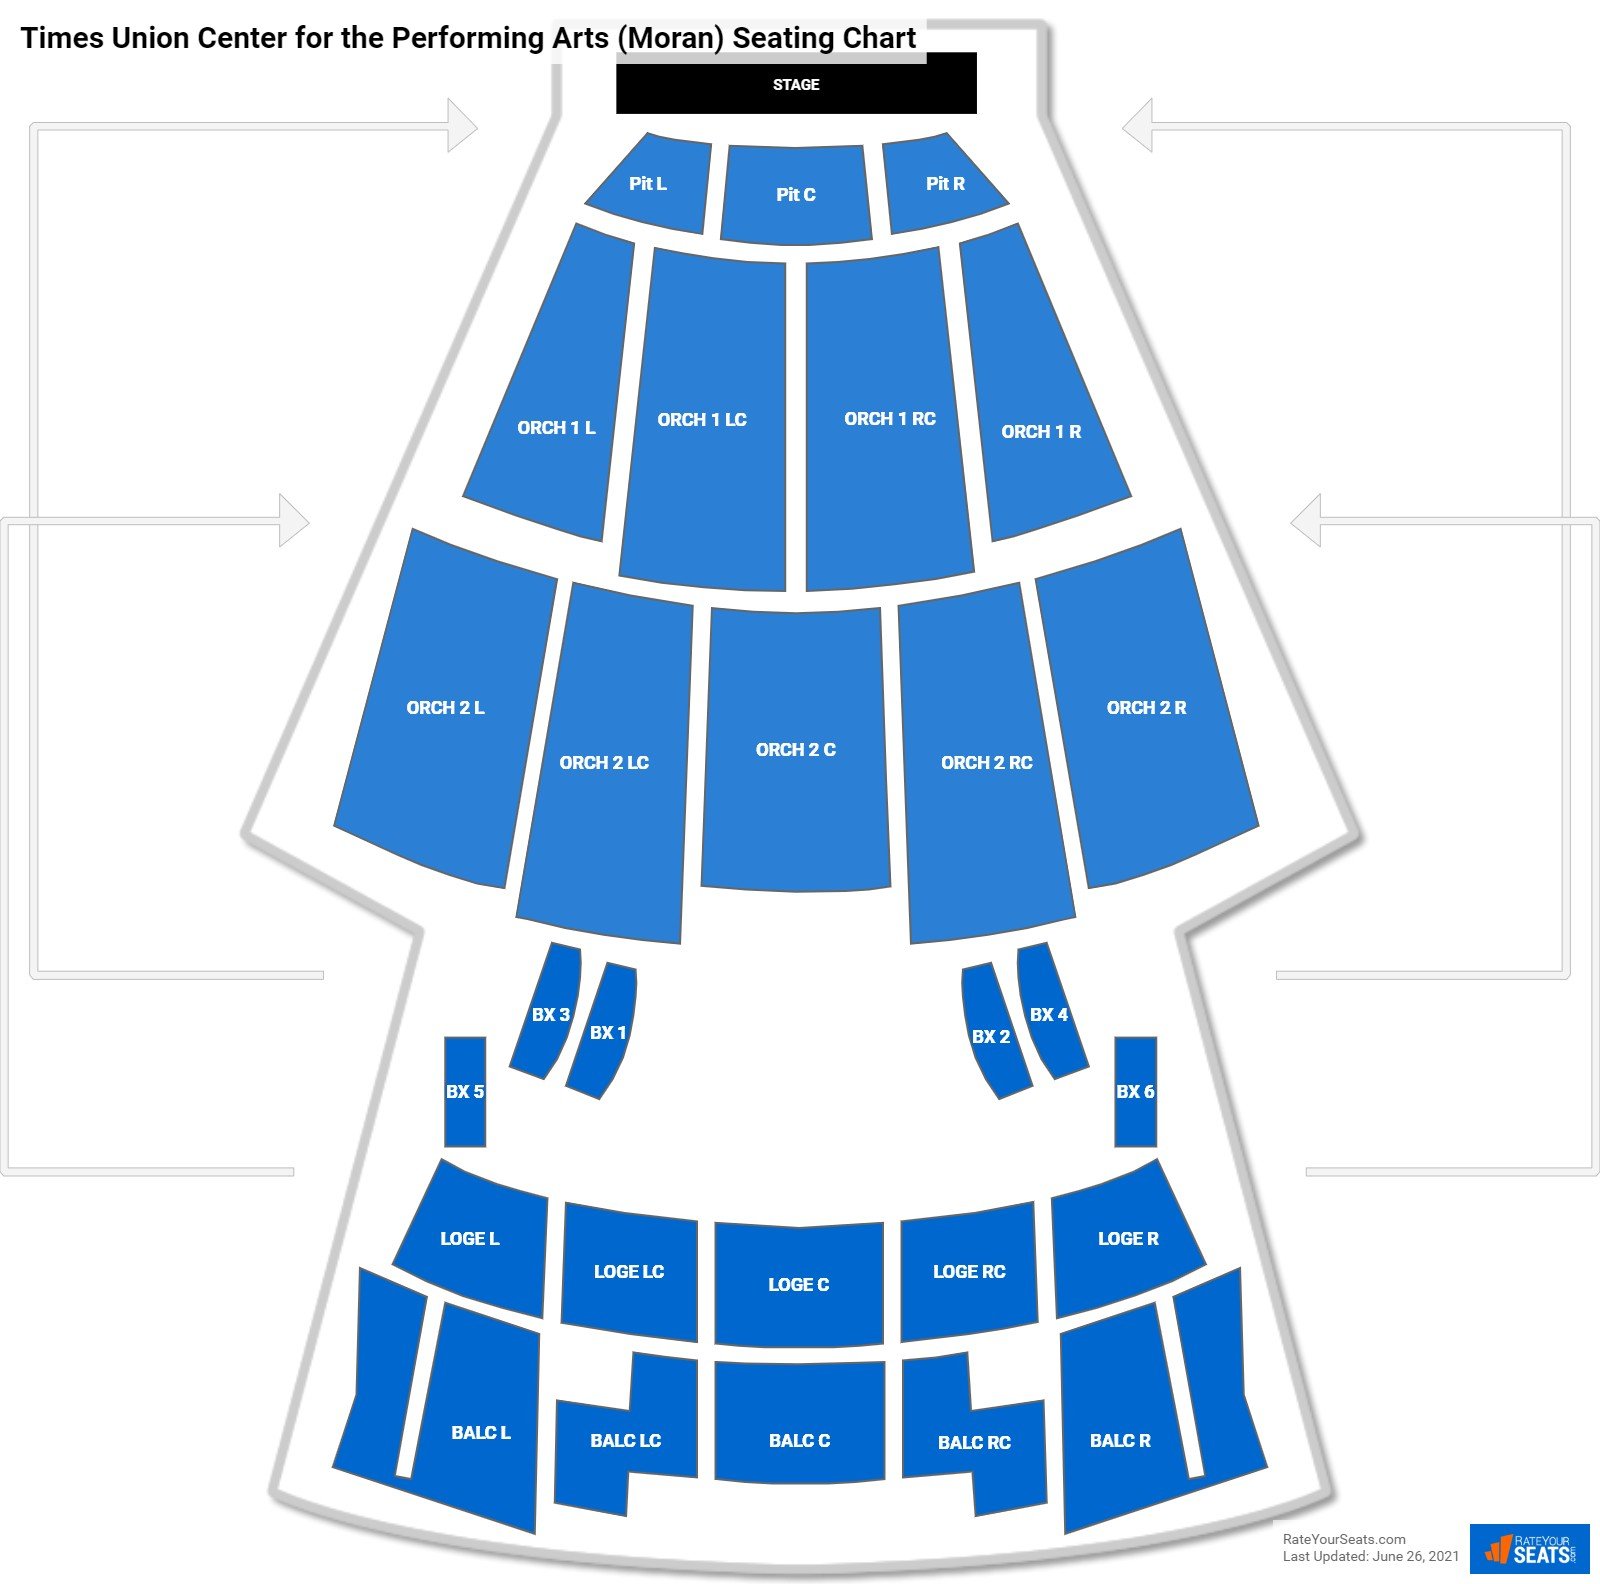 Times Union Center for the Performing Arts (Moran) Theater Seating Chart